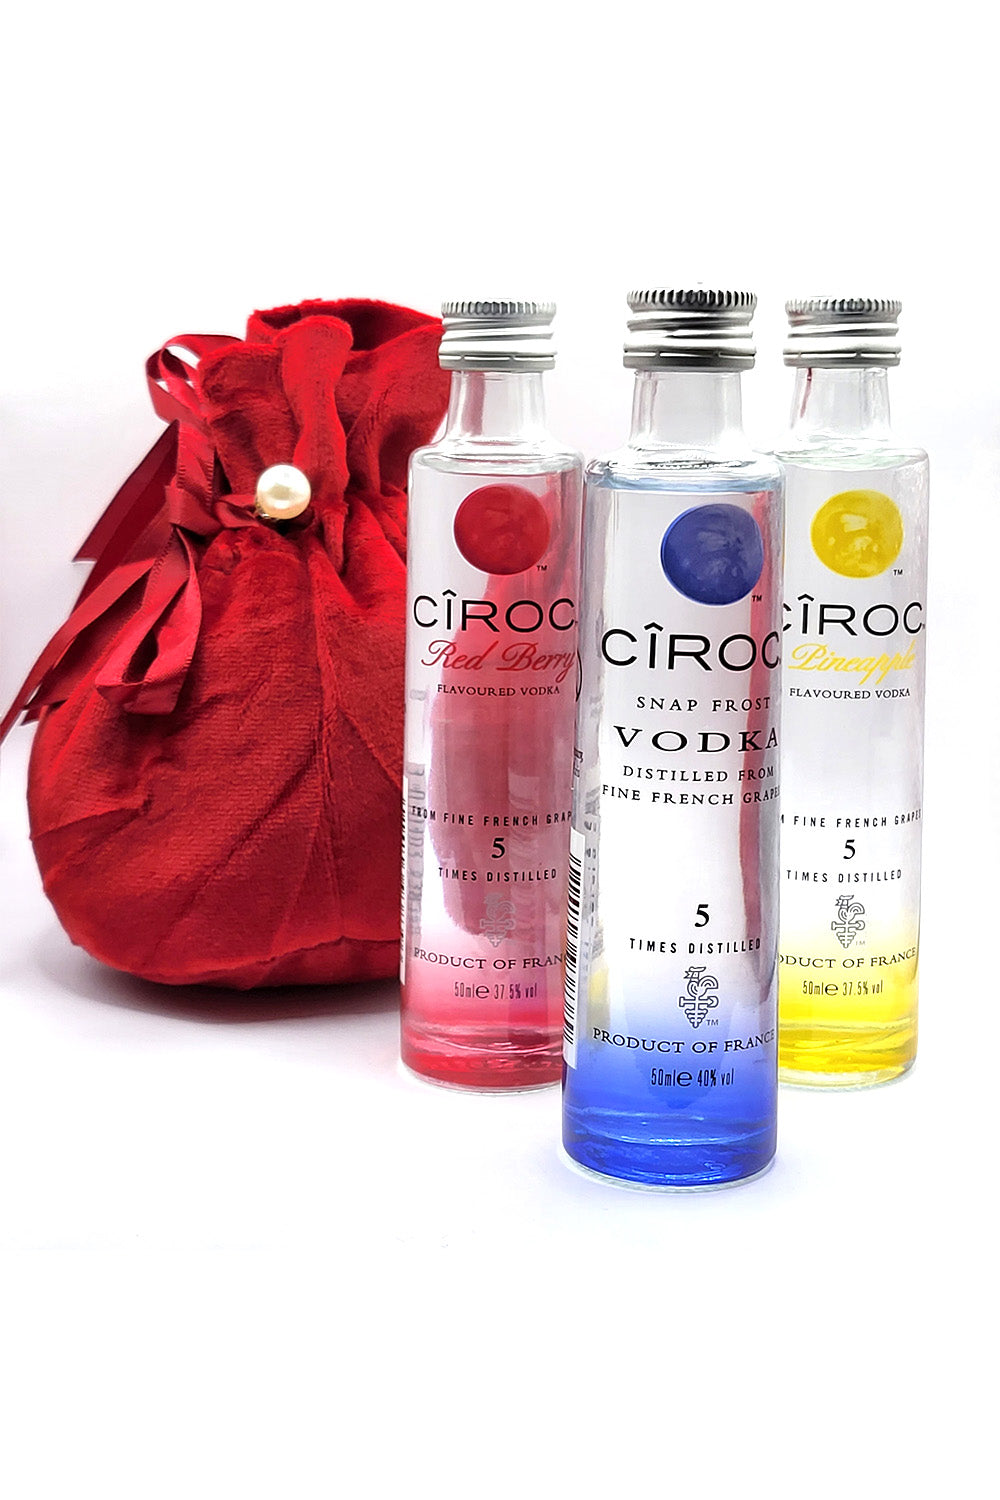 Ciroc Trio Miniature Set in Red Velvet Bag ( Red Cherry/Snap Frost/Pineapple )